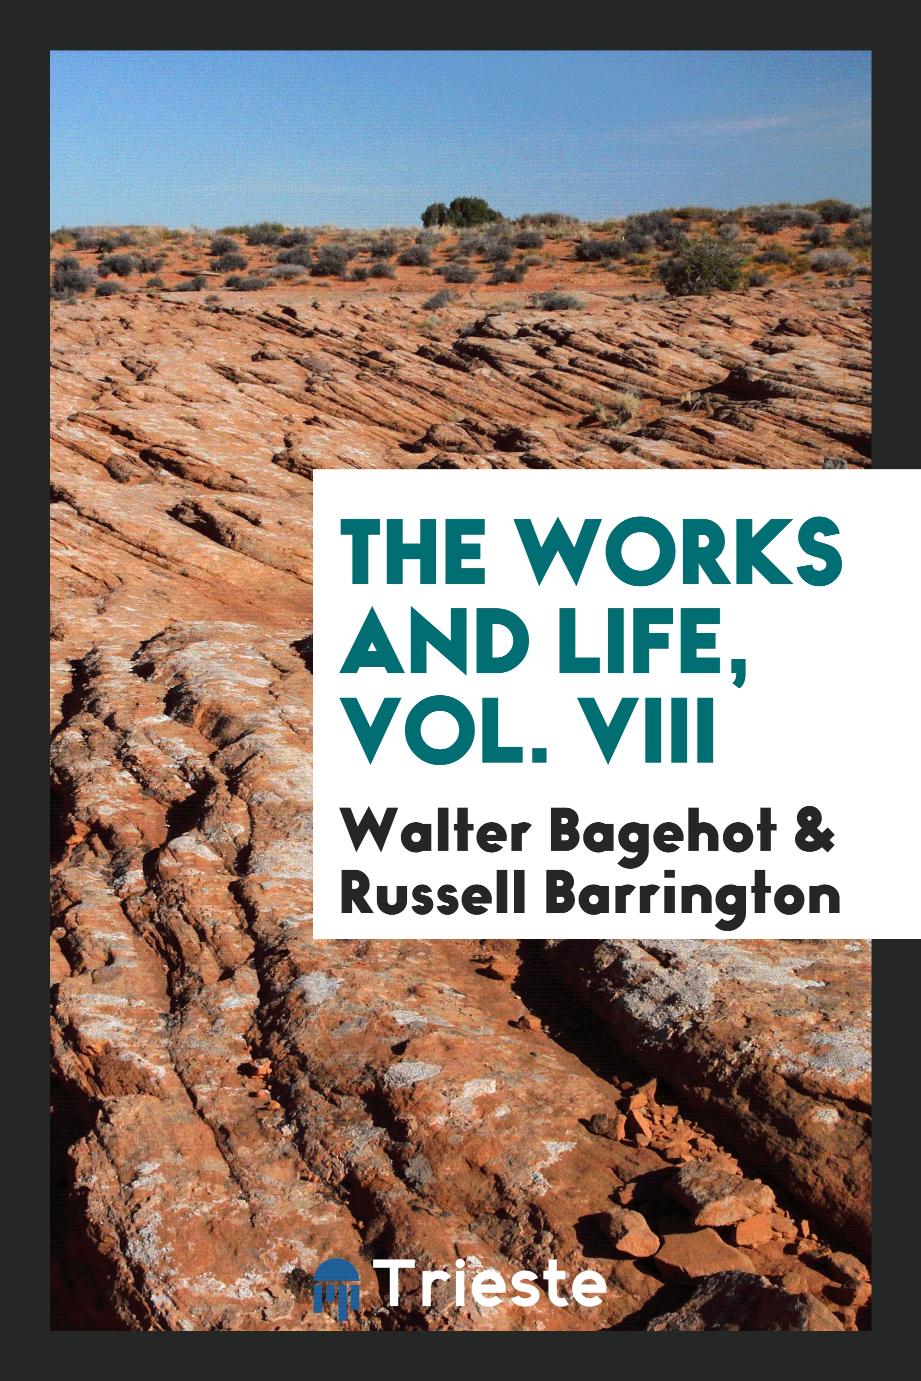 The works and life, Vol. VIII